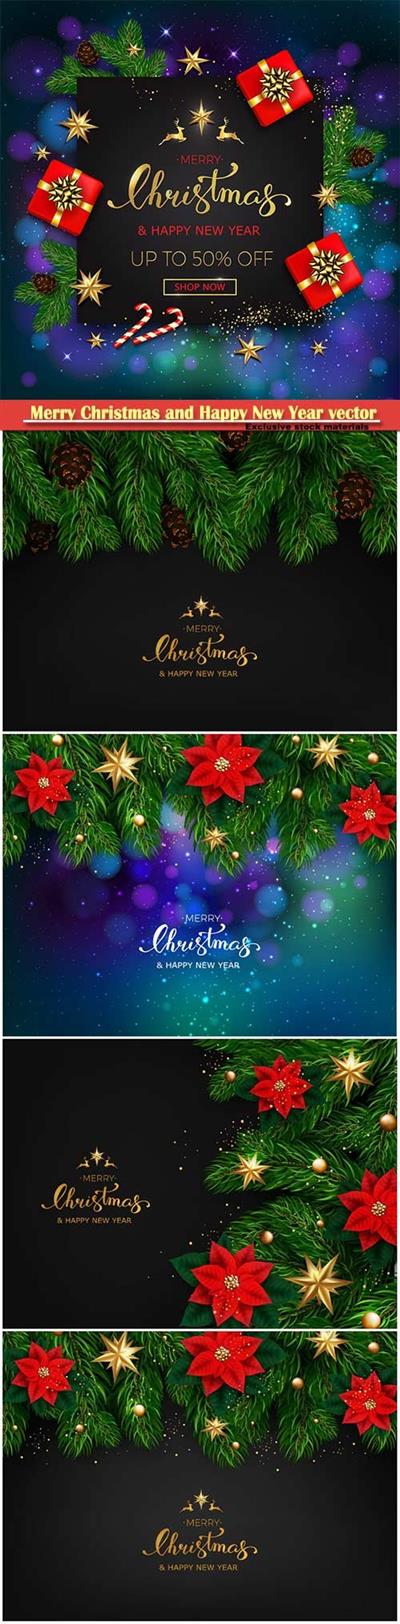 2019 Merry Christmas and Happy New Year vector design # 5